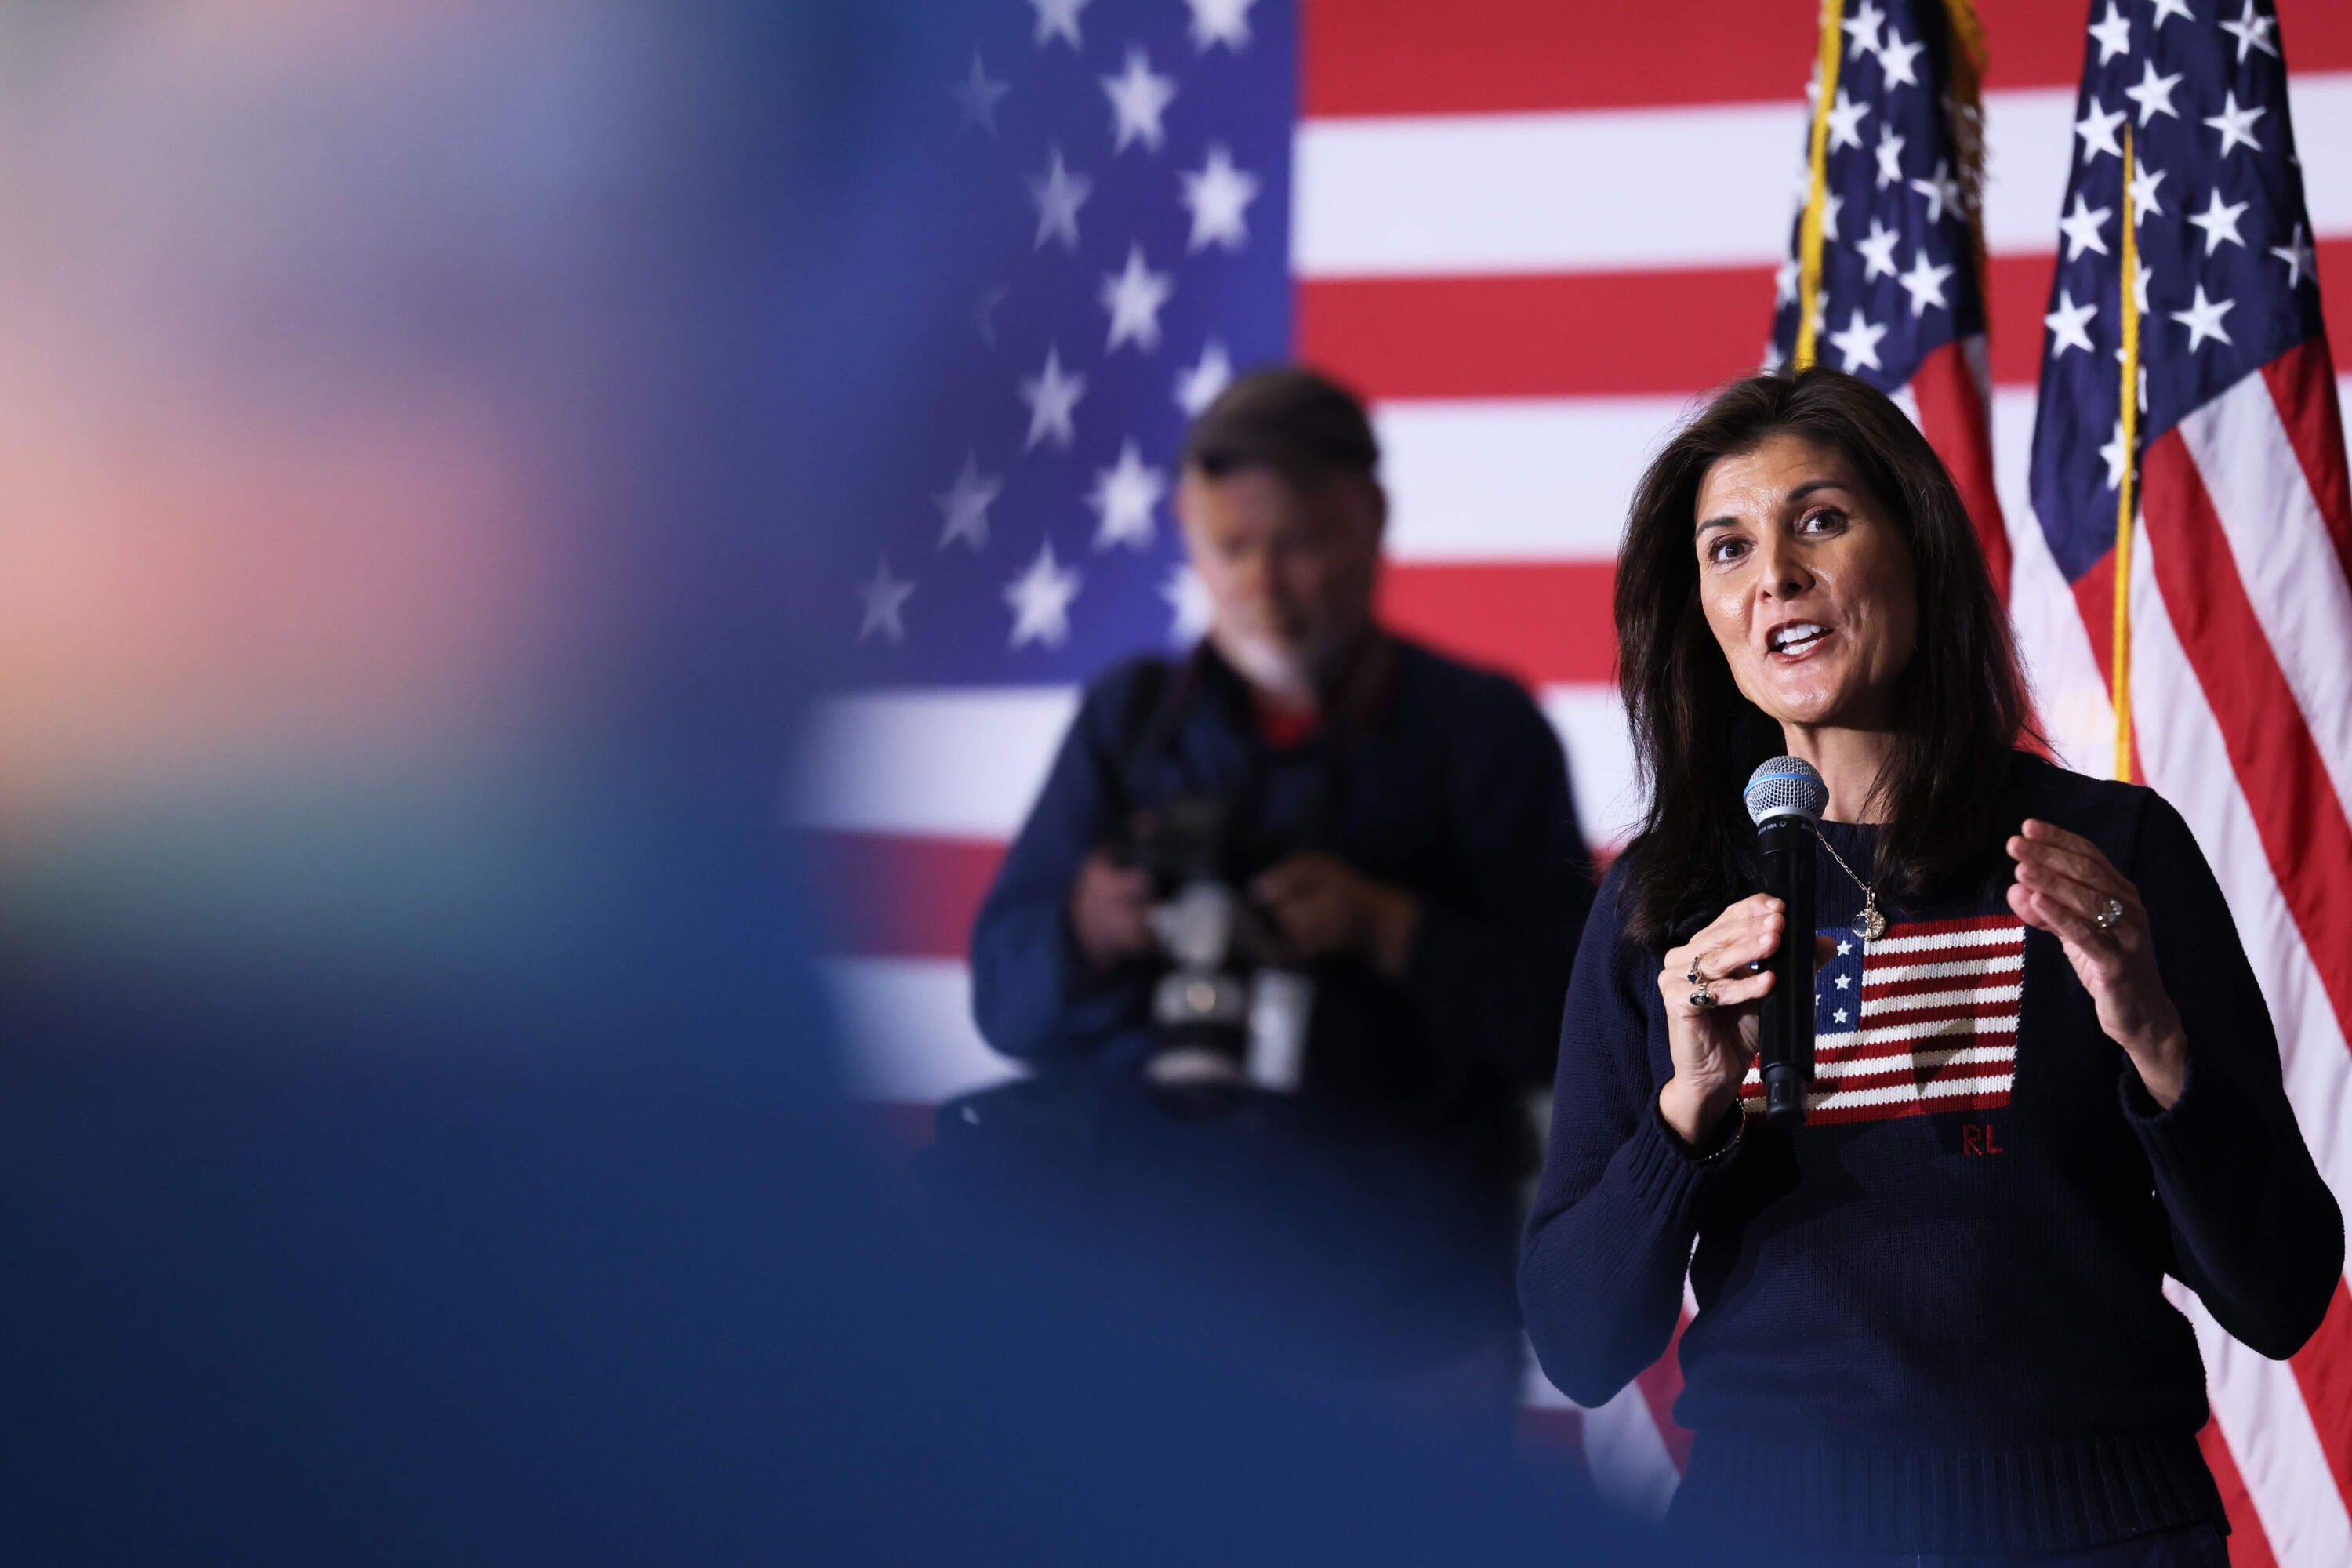 Presidential hopeful Nikki Haley is having a moment in New Hampshire